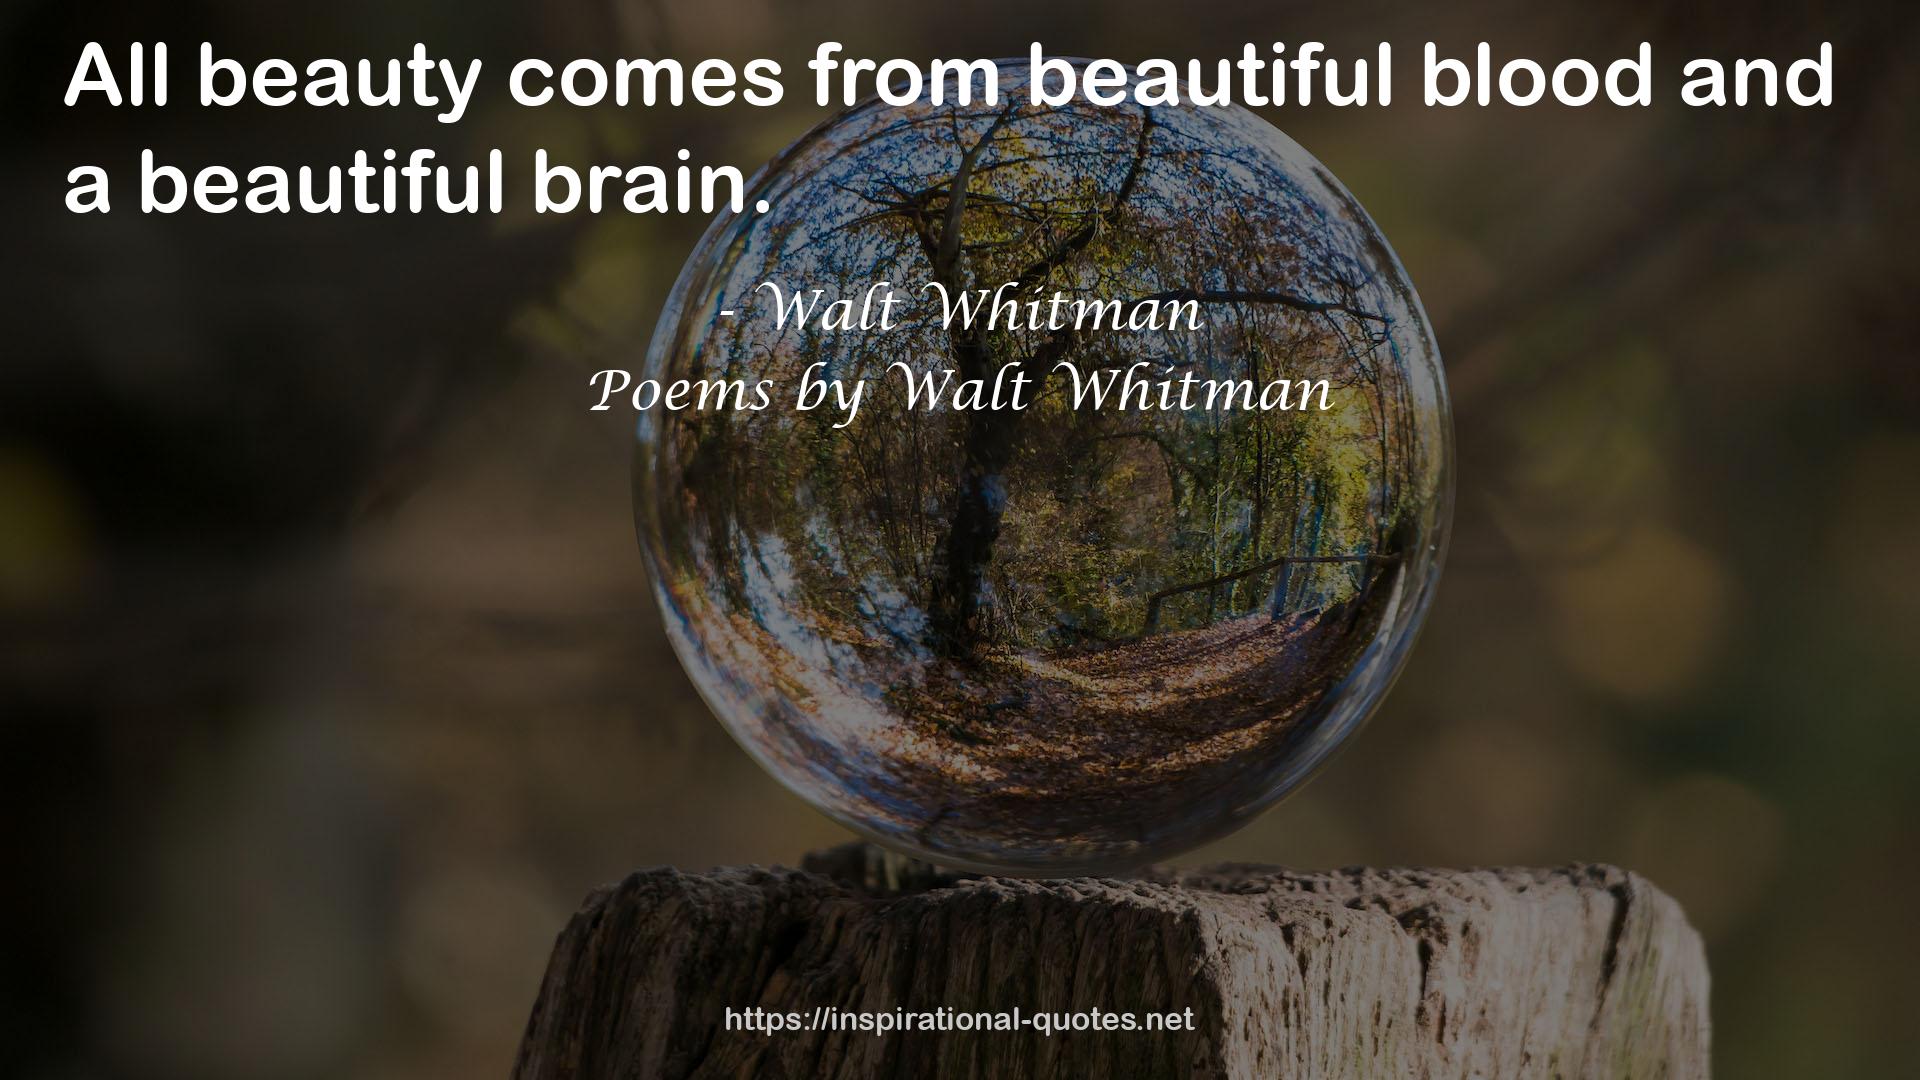 Poems by Walt Whitman QUOTES